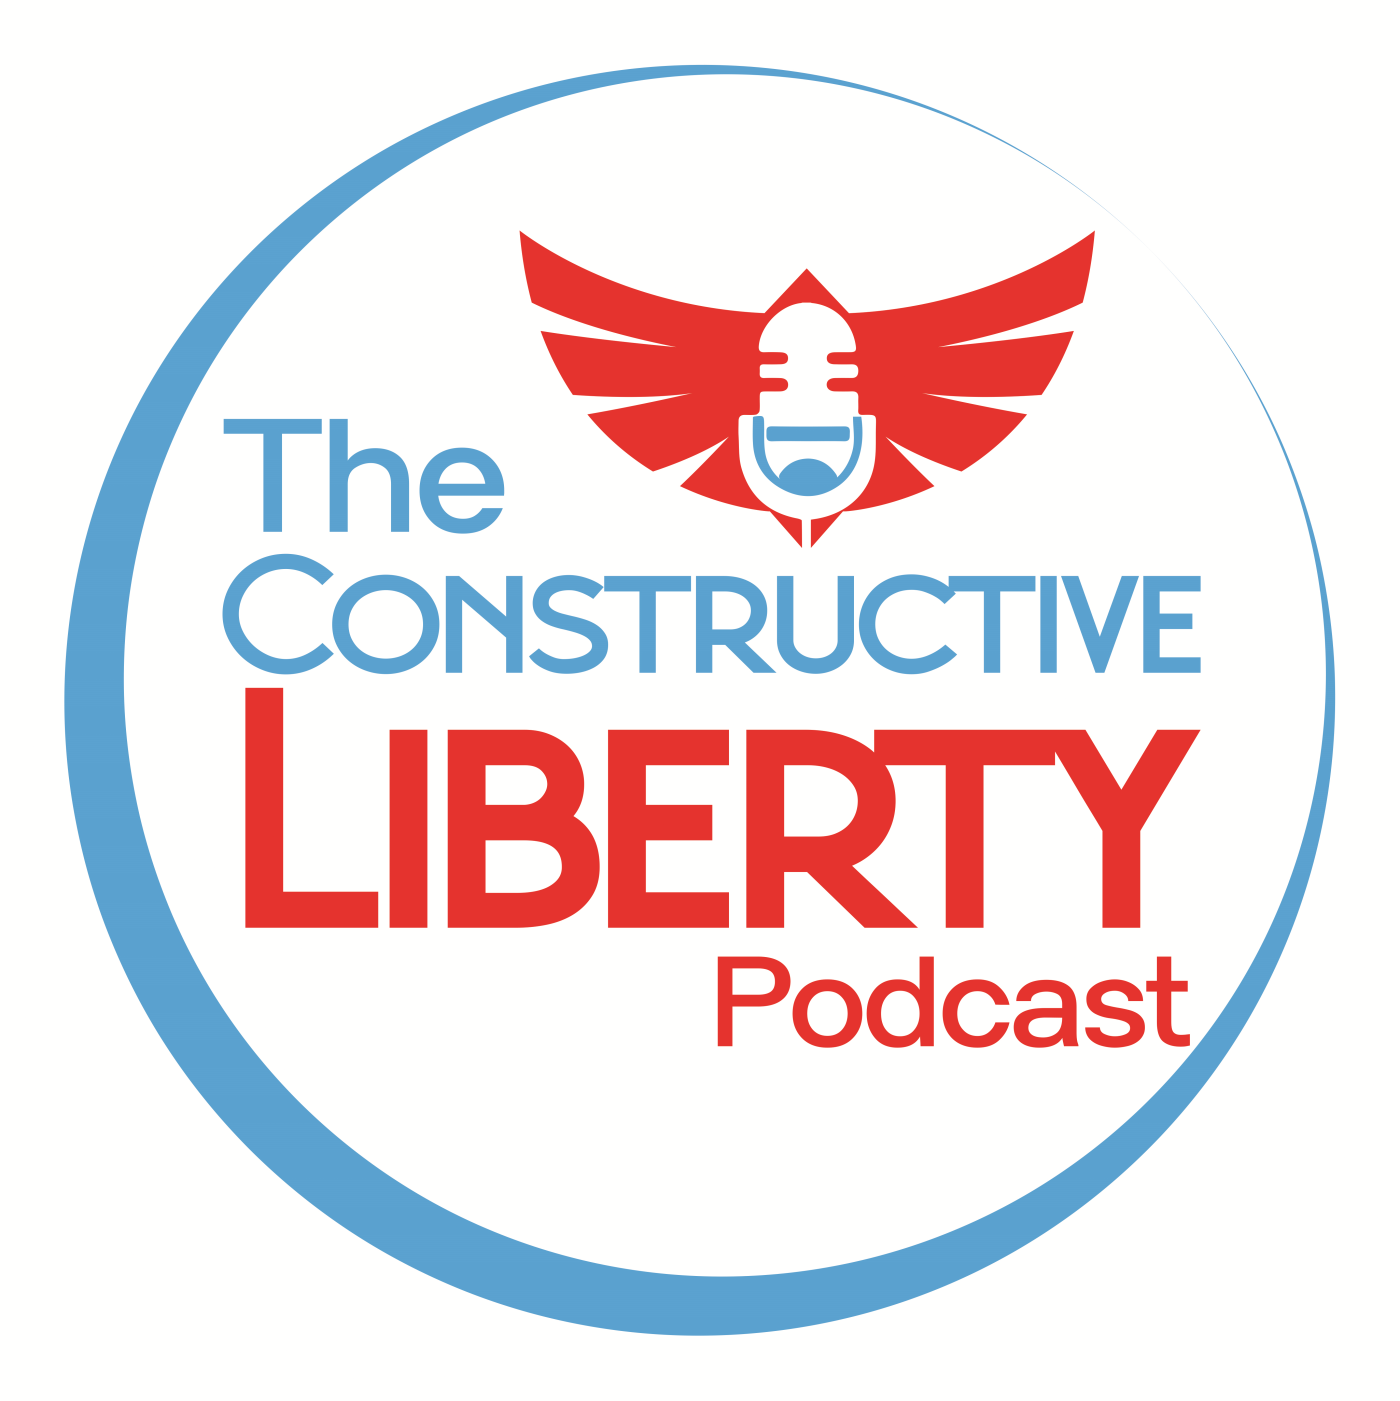 The Constructive Liberty Podcast